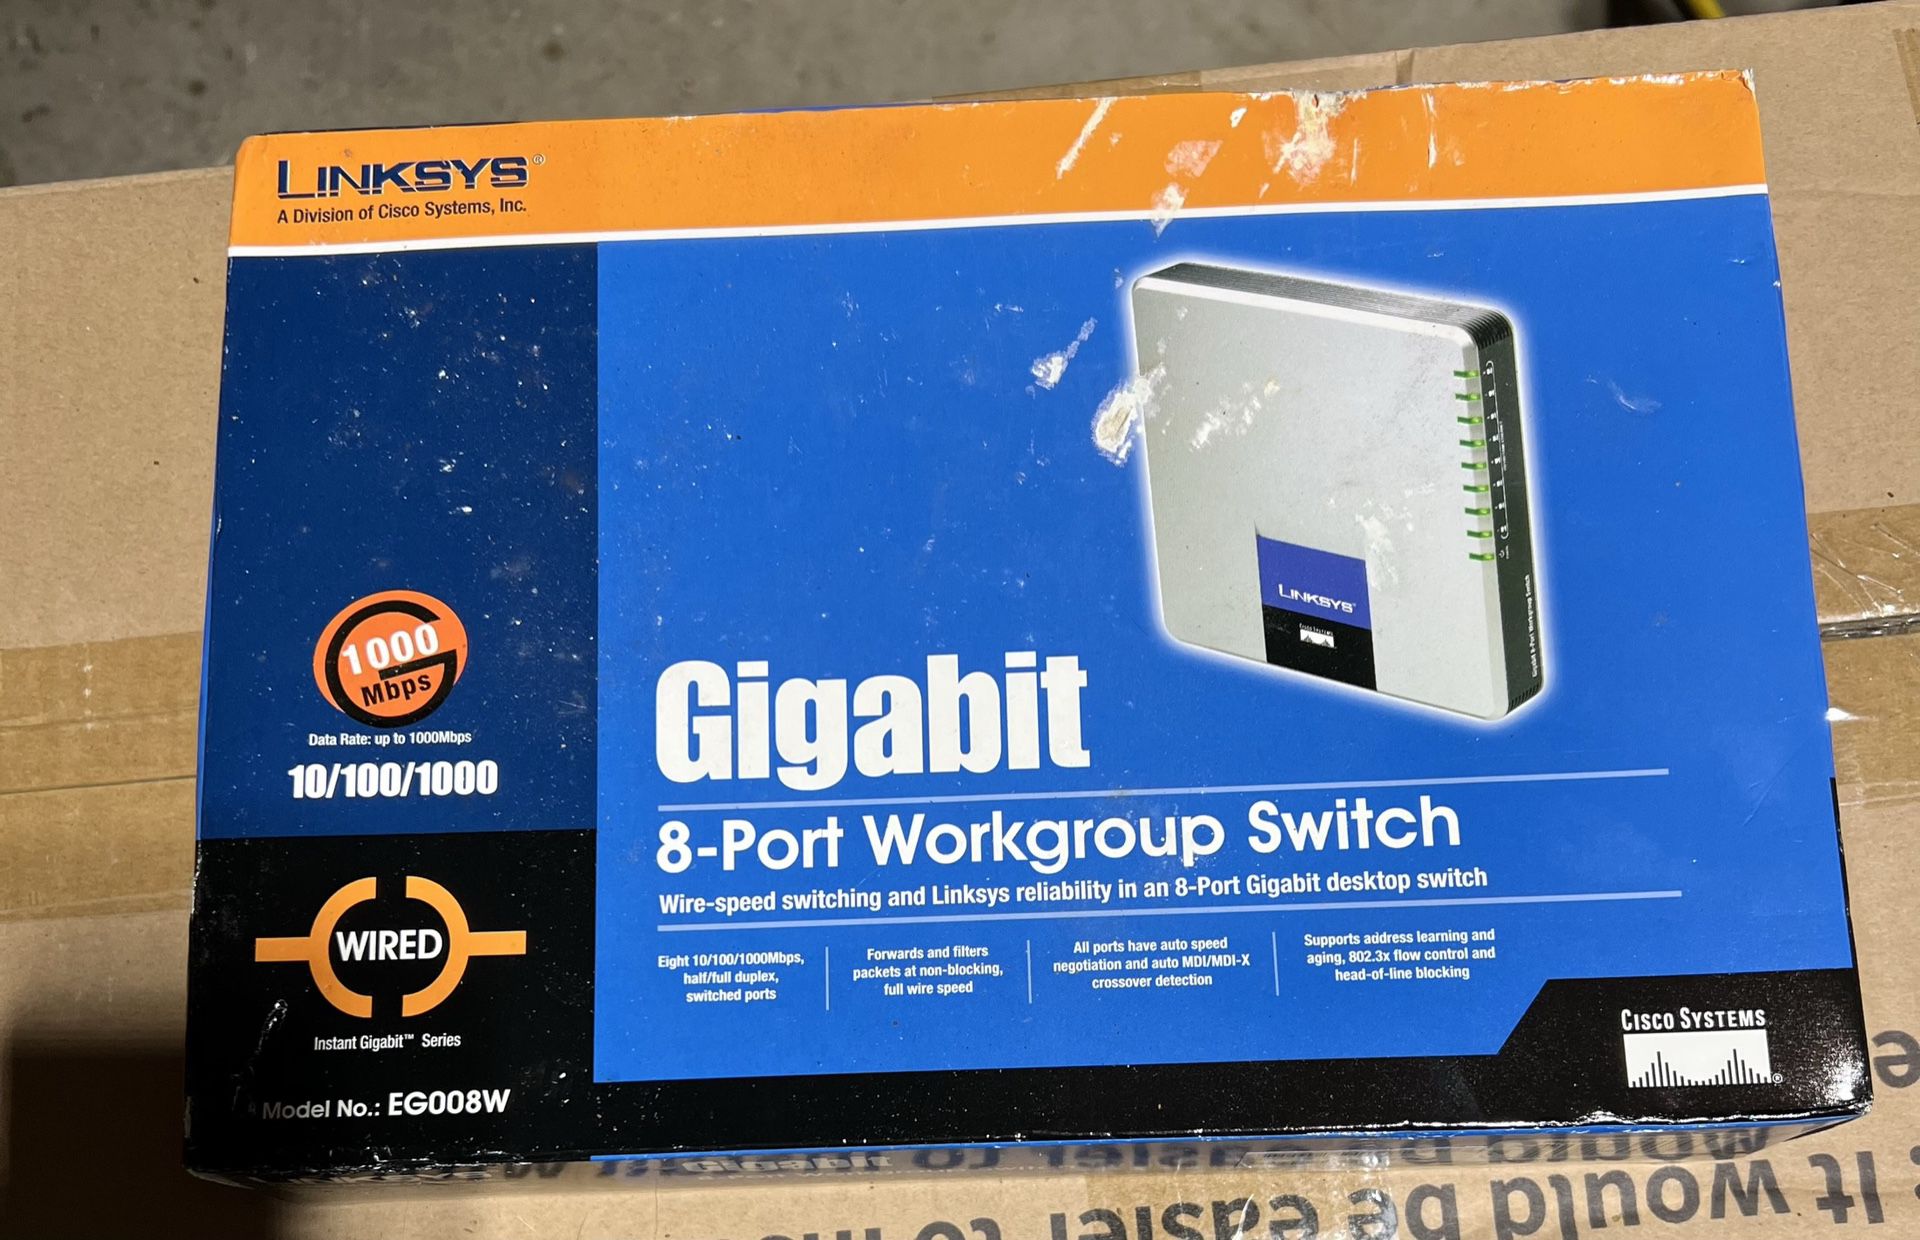 Linksys (Cisco) 8-port Workgroup Switch